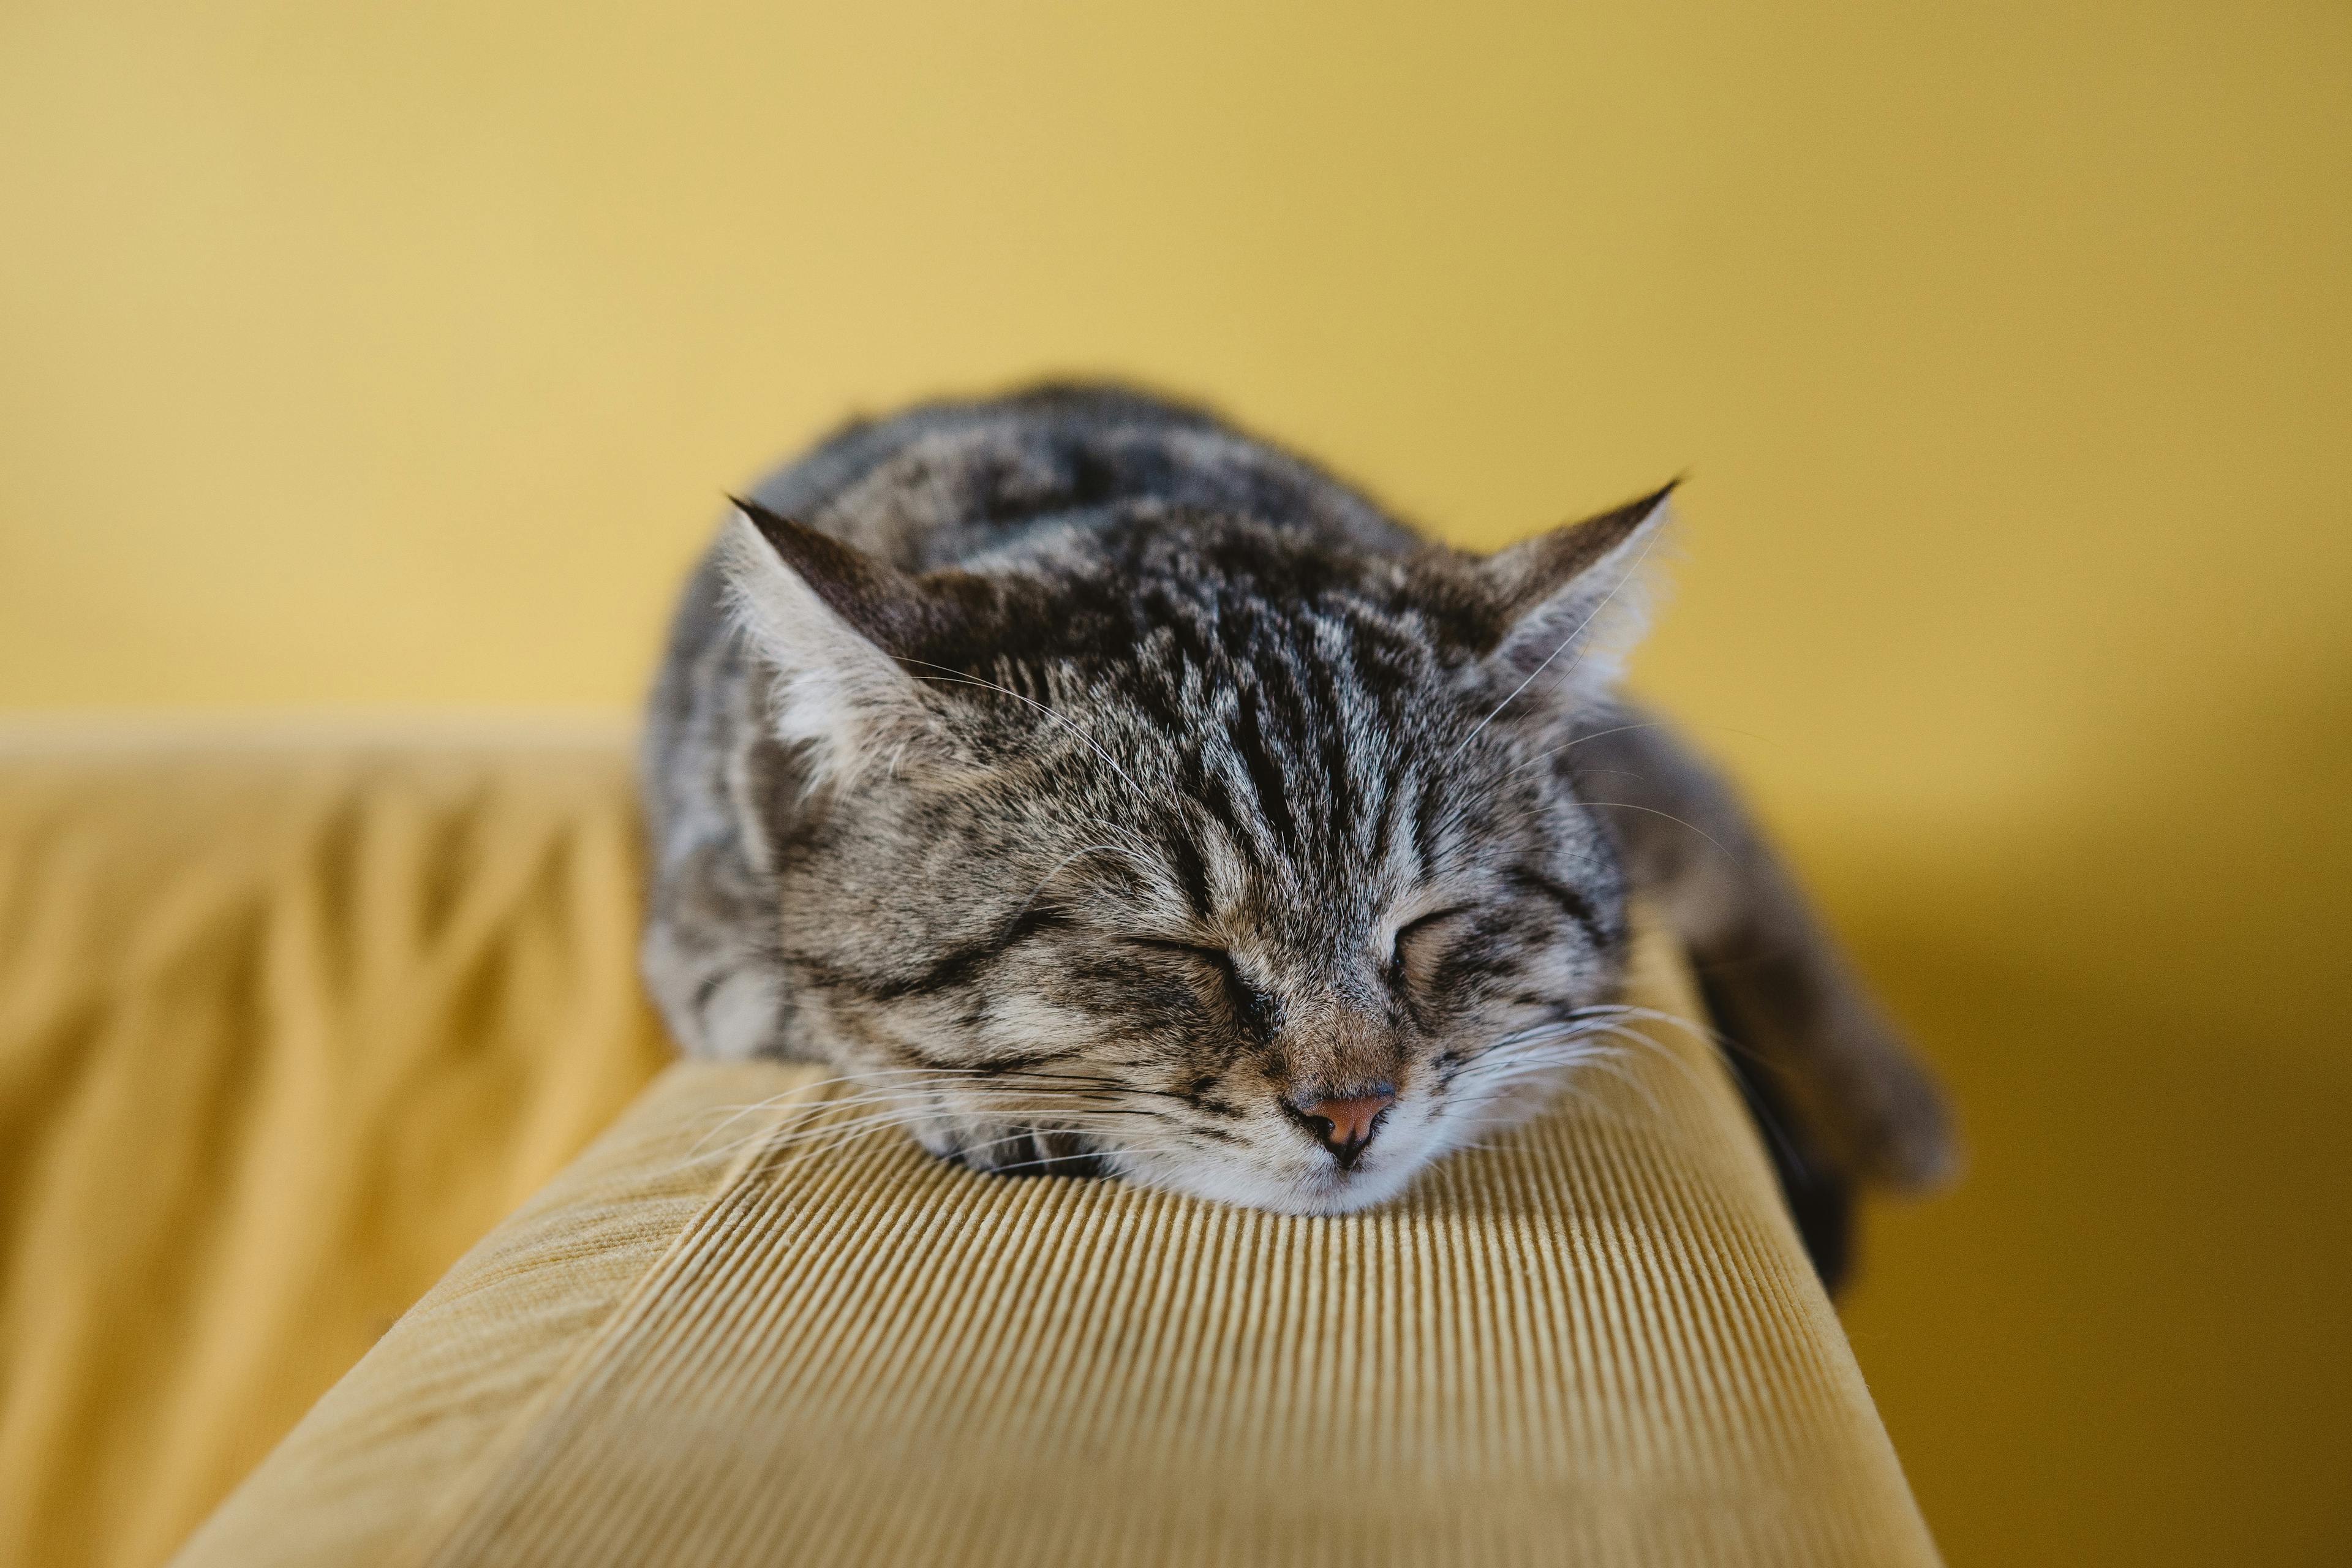 An adorable cat sleeping comfortably. Explore affordable cat insurance options and compare prices to find the perfect coverage for your feline companion's well-being and your peace of mind.